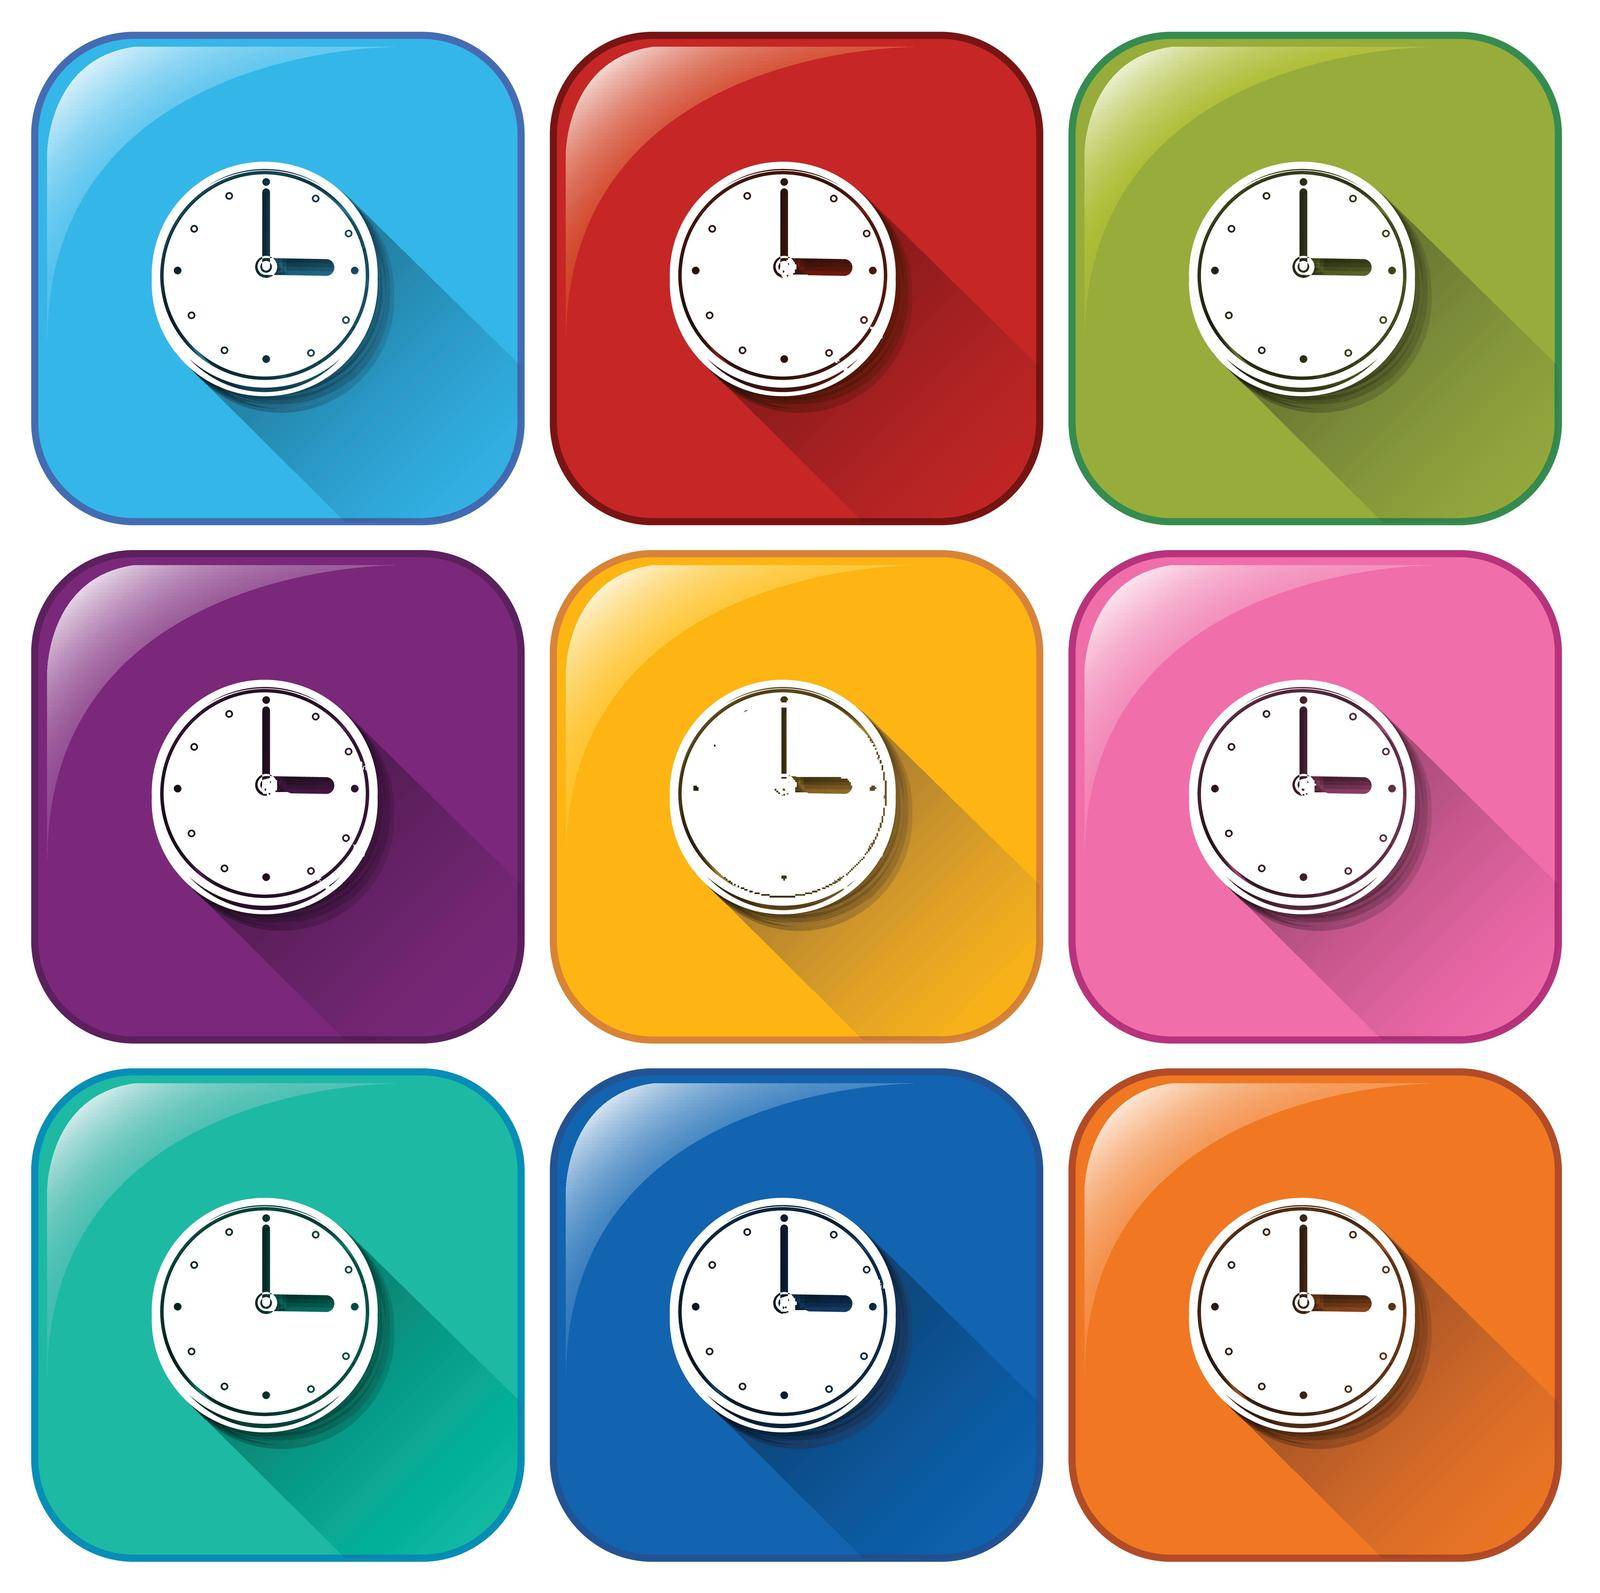 Illustration of the rounded icons with clocks on a white background